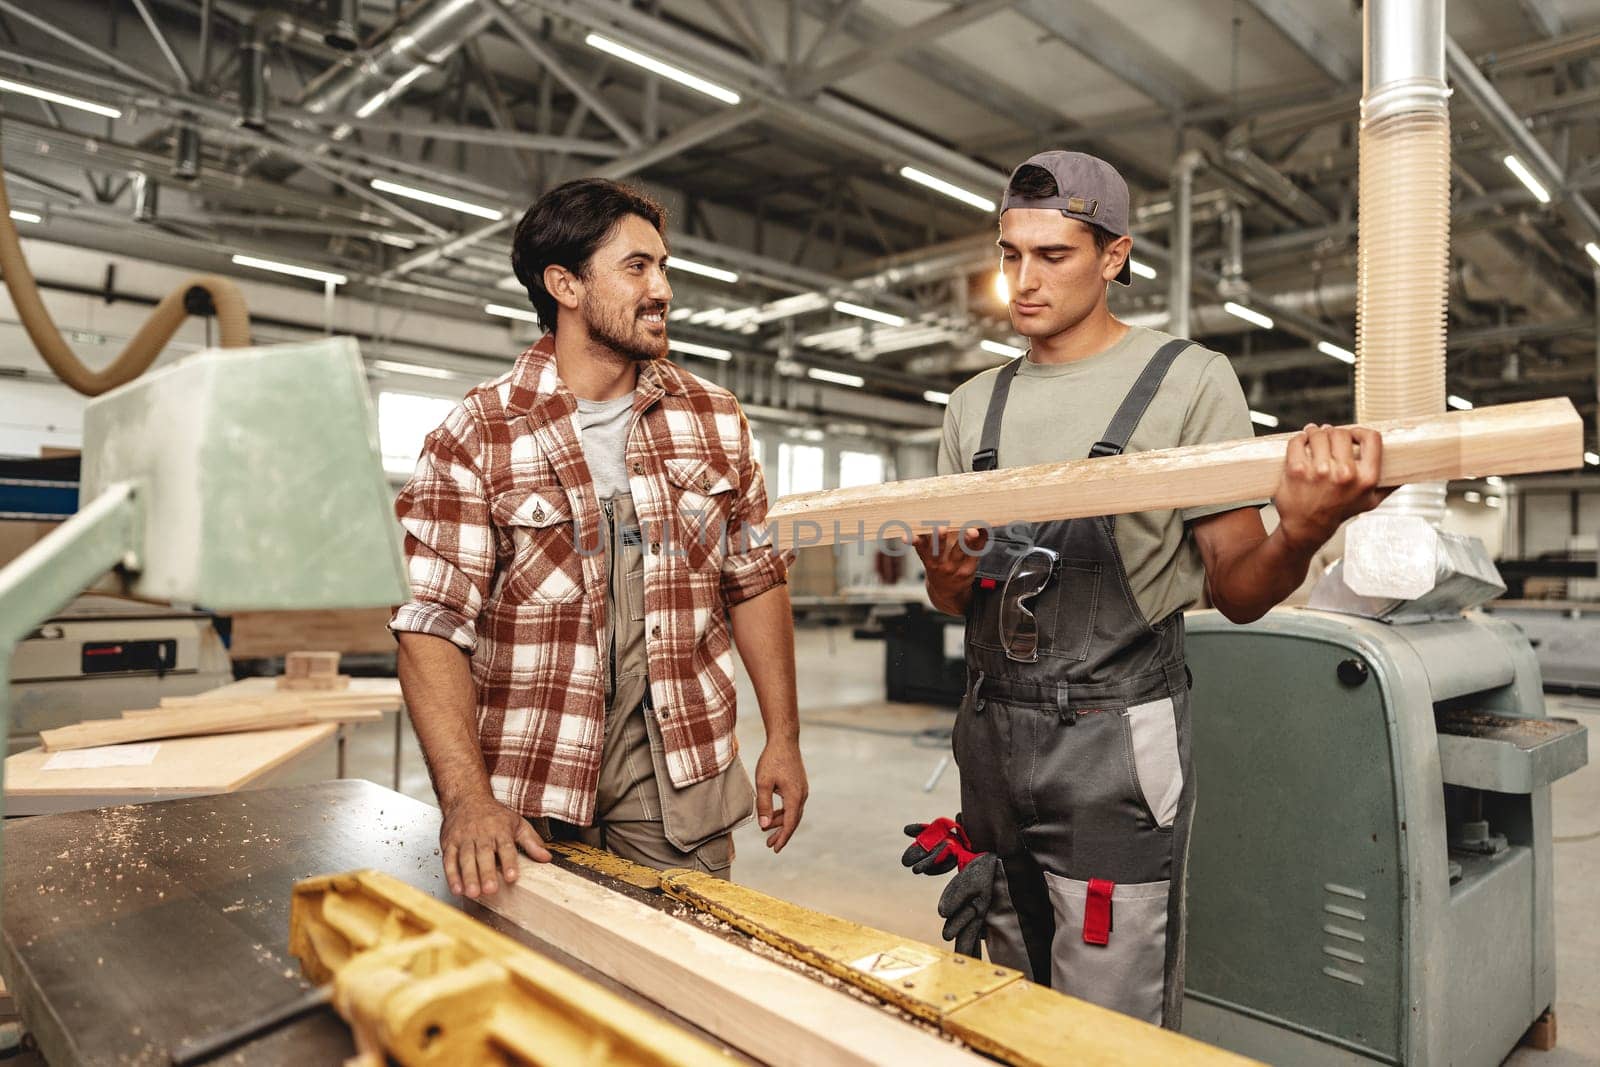 Two young carpenters working with wood standing at table in workshop by Fabrikasimf